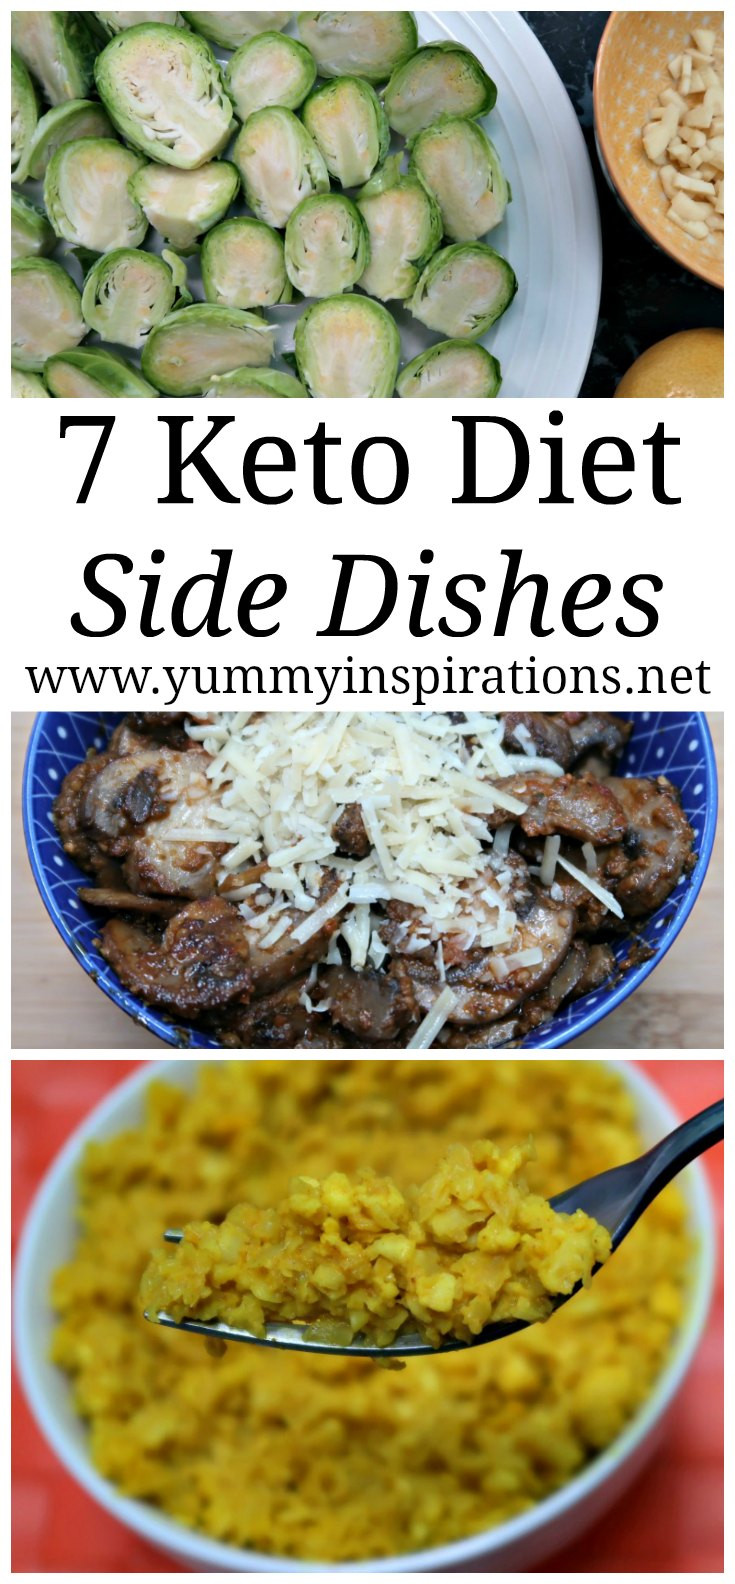 Keto Side Dishes
 7 Keto Side Dishes Easy Low Carb Sides LCHF Recipes